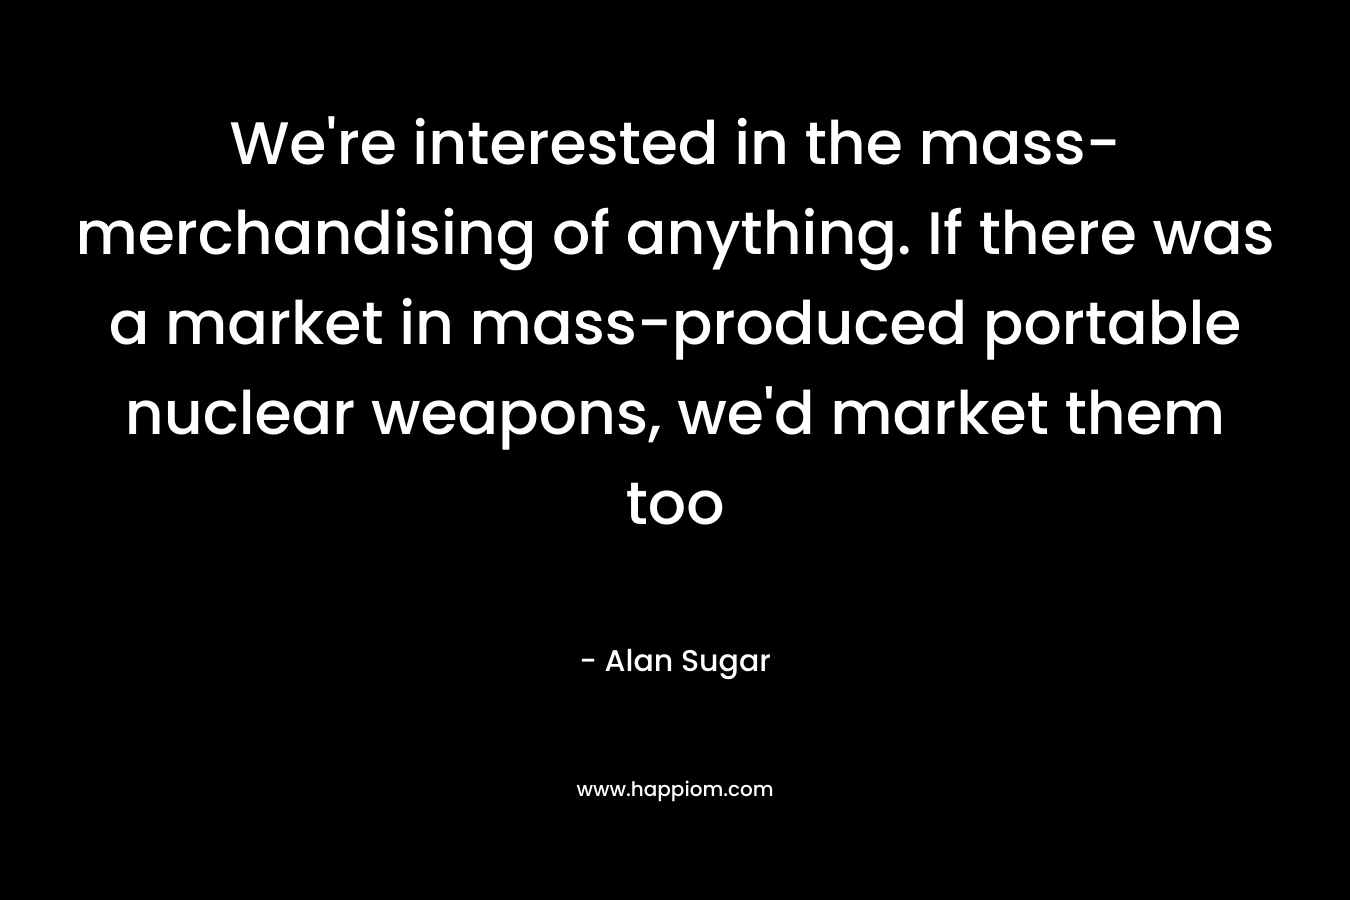 We’re interested in the mass-merchandising of anything. If there was a market in mass-produced portable nuclear weapons, we’d market them too – Alan Sugar